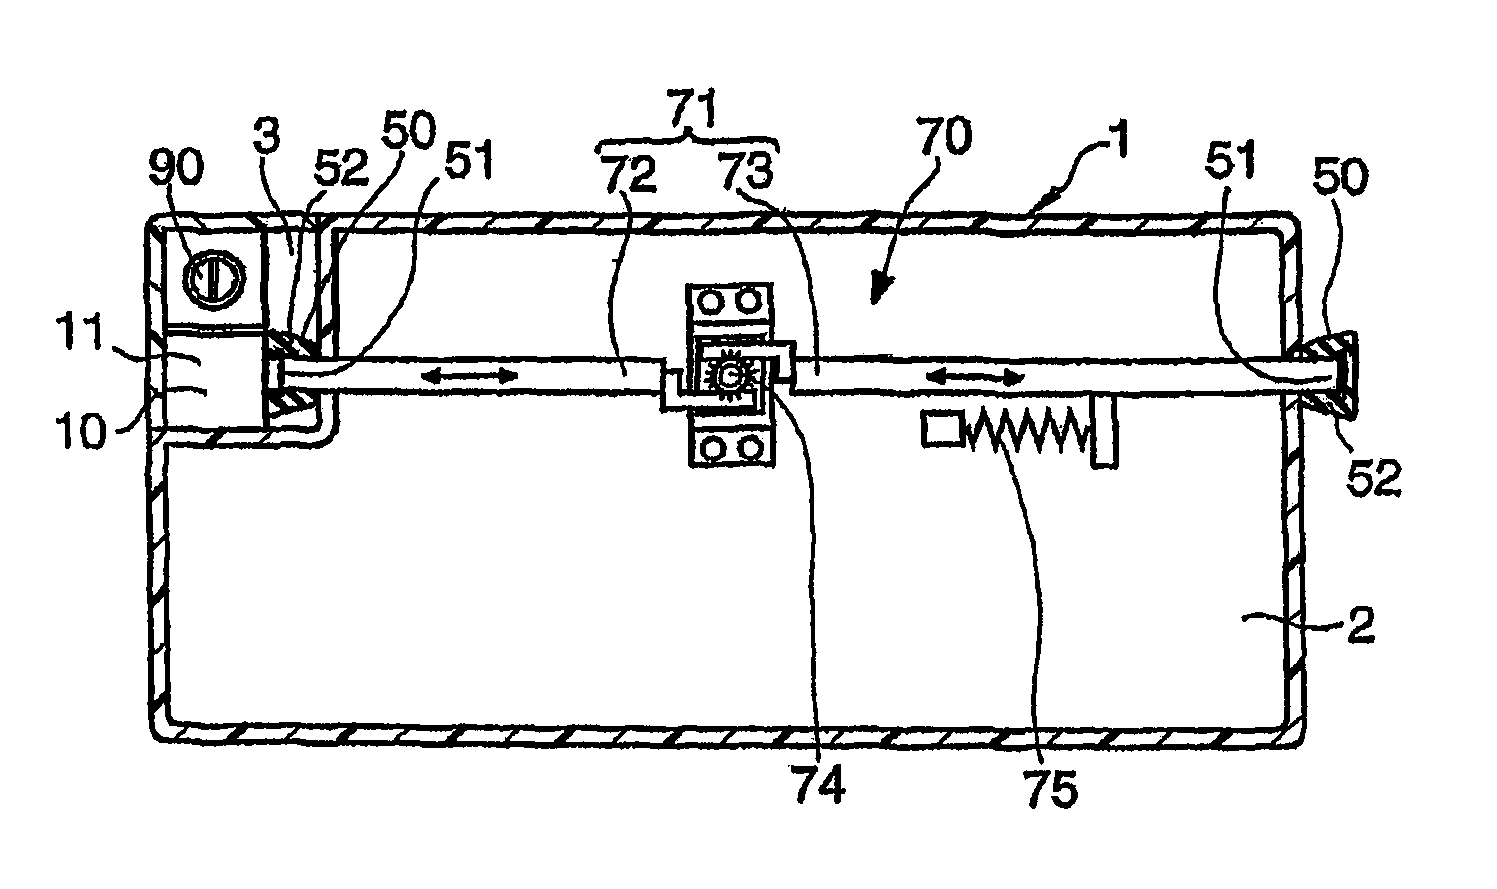 Lock apparatus for a glove box of a vehicle